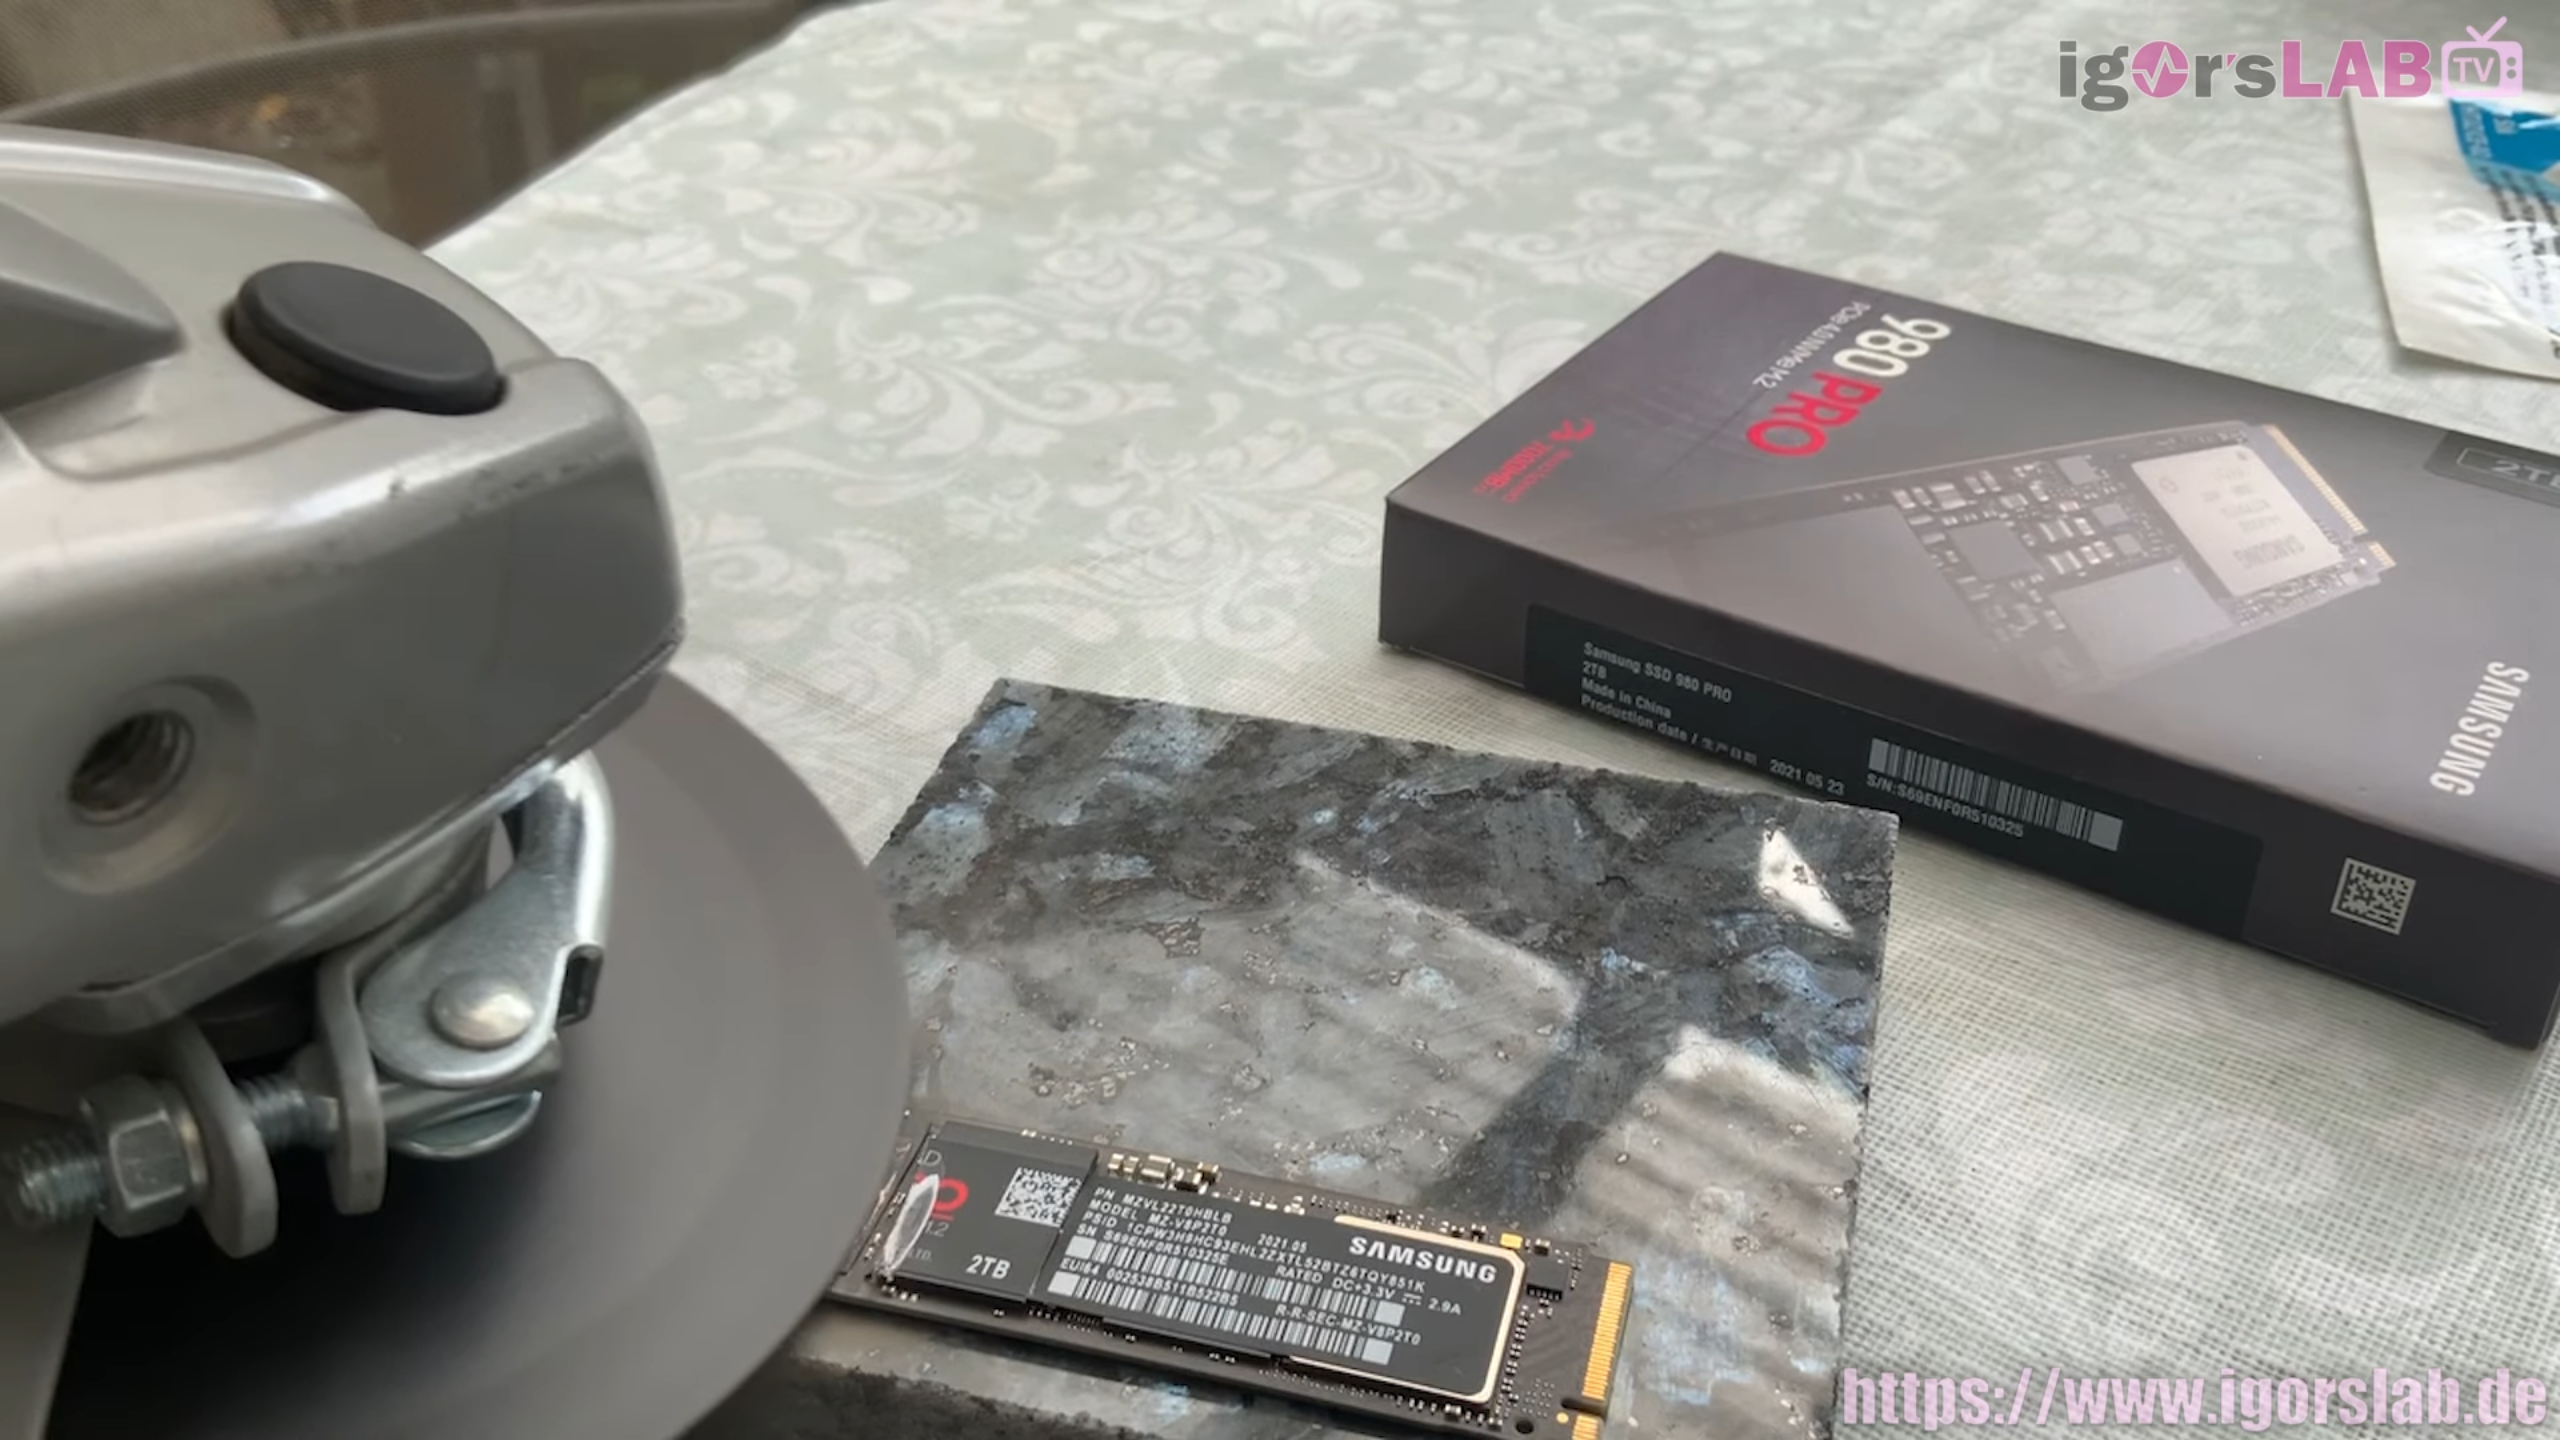 Samsung asks customer to destroy high-end 980 Pro SSD before